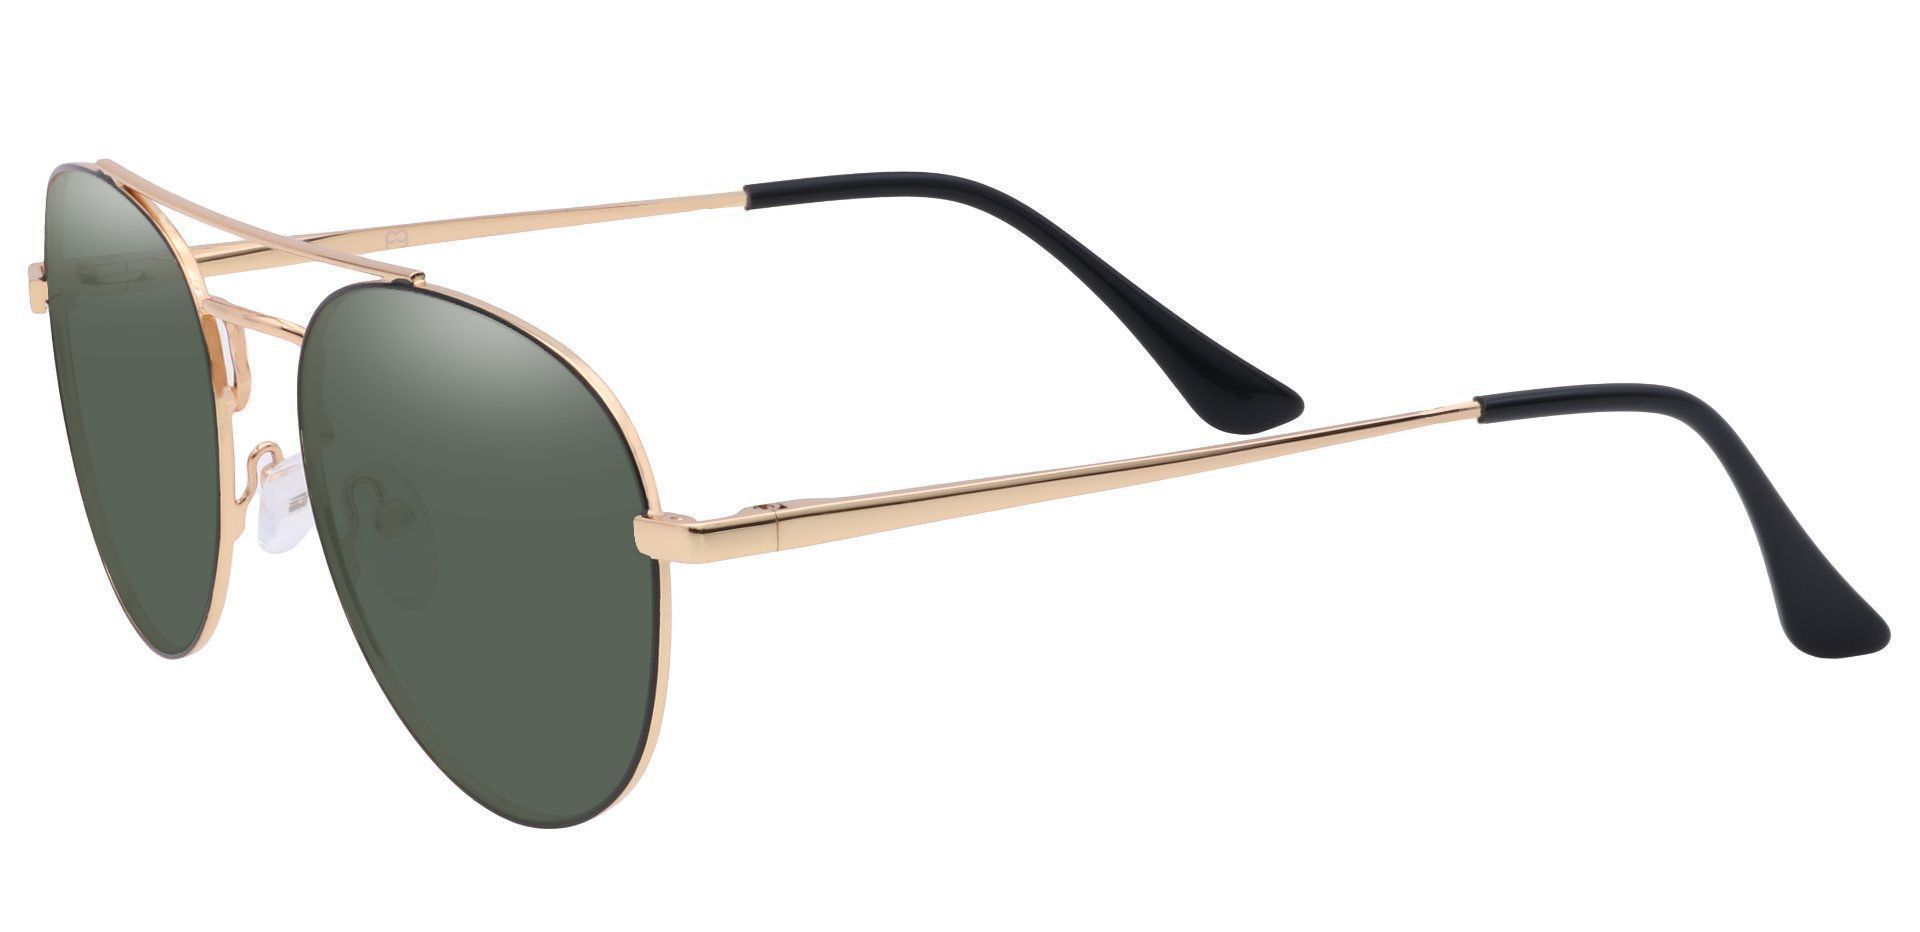 Trapp Aviator Reading Sunglasses - Gold Frame With Green Lenses